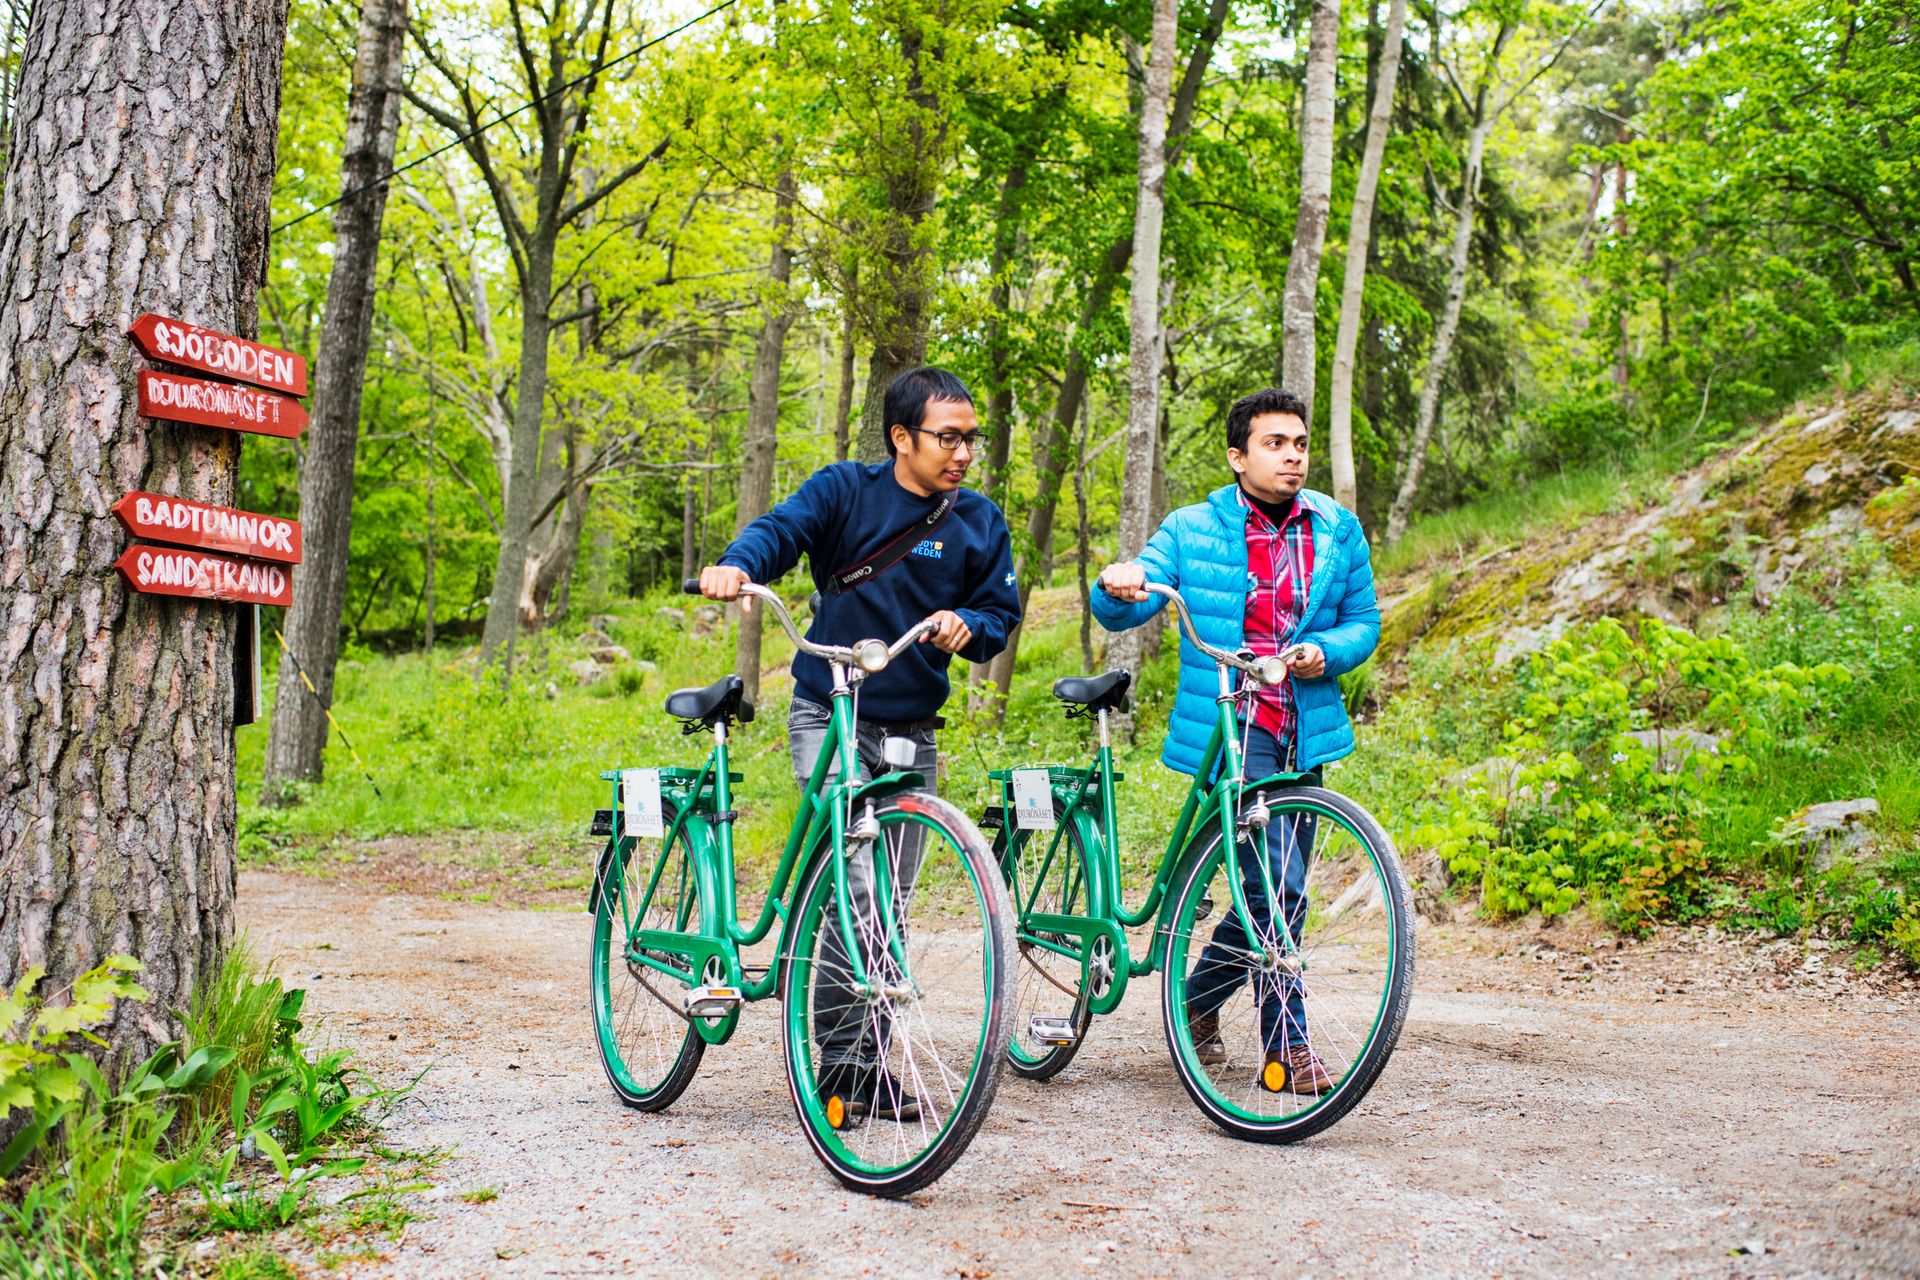 Two international students walking with green bikes in a forest.